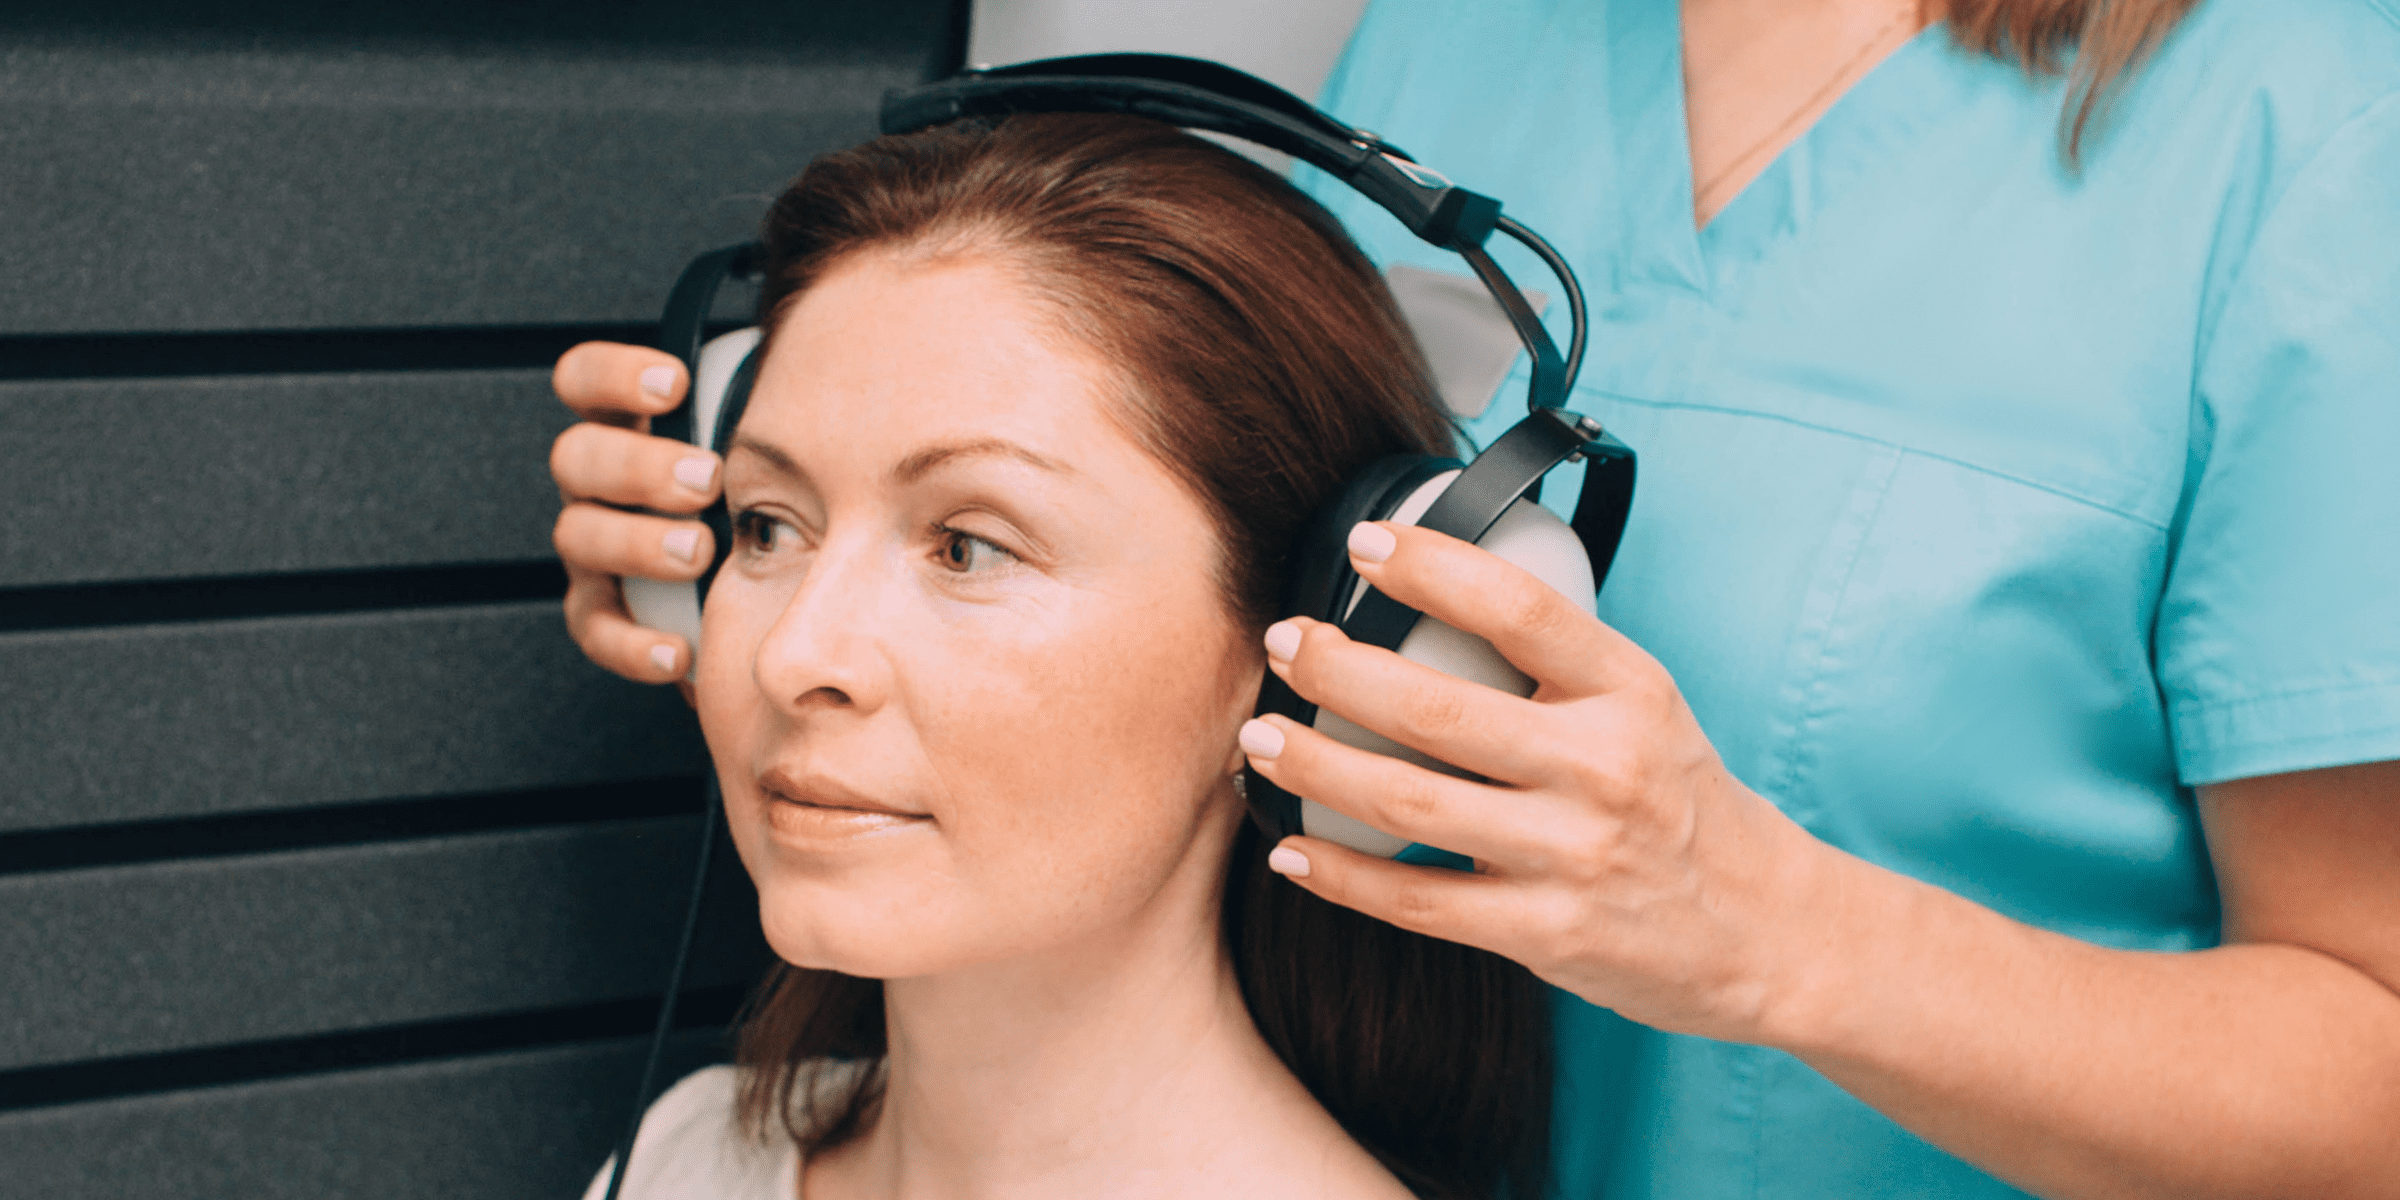 woman getting her hearing tested by audiologist